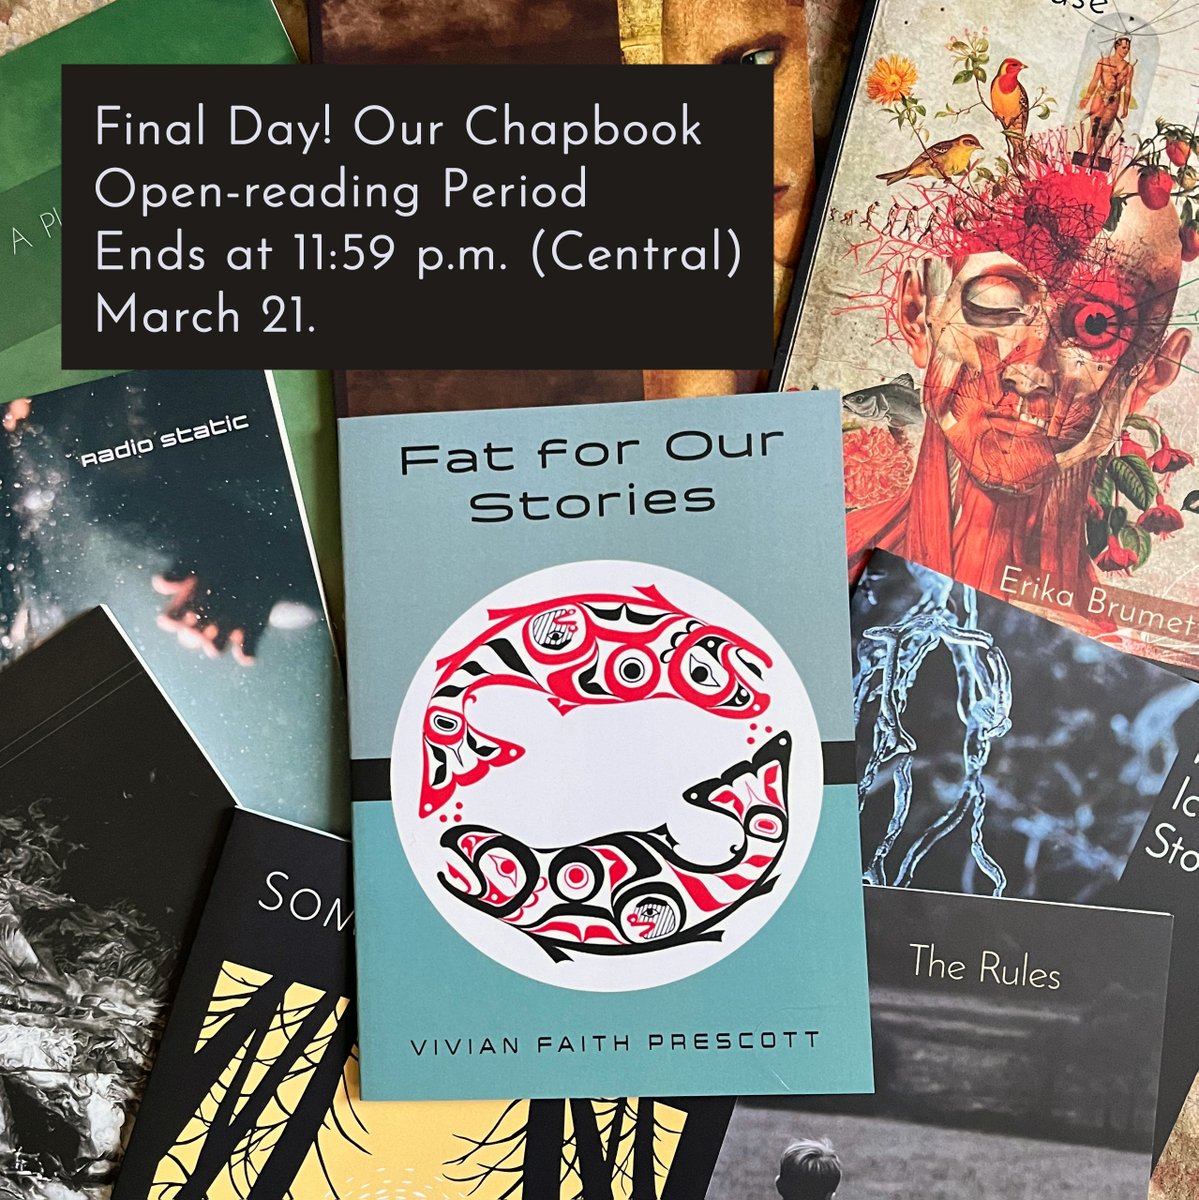 Last chance: greenlindenpress.submittable.com/submit We hope to read your work. #poetrycommunity #chapbook #WritingCommunity